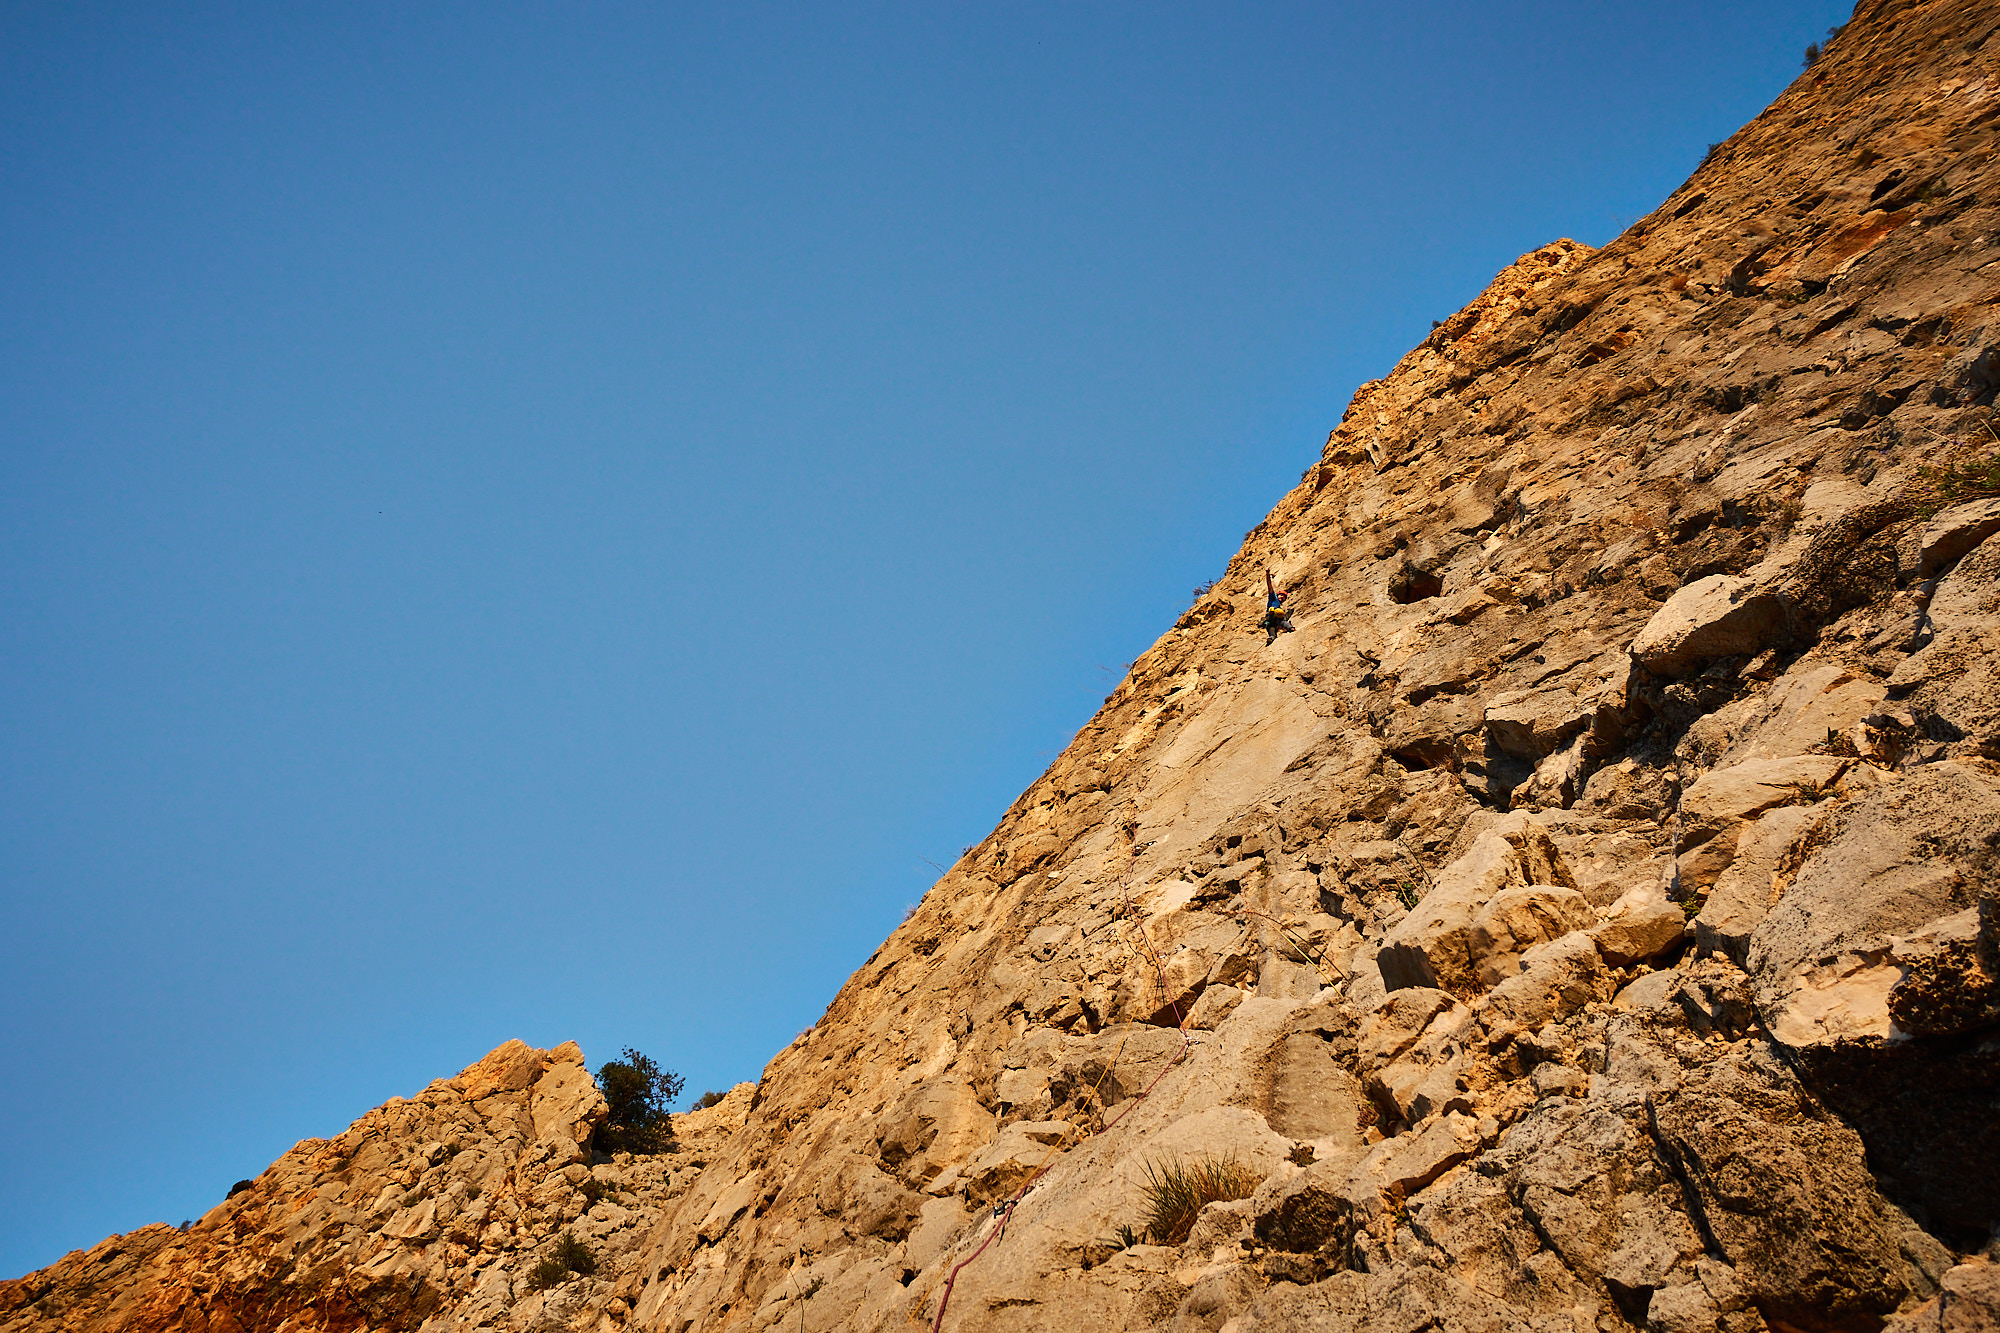 A climber sport climbing on the first pitch of a route called Amptrax on a limestone cliff in southern Spain with blue sky above